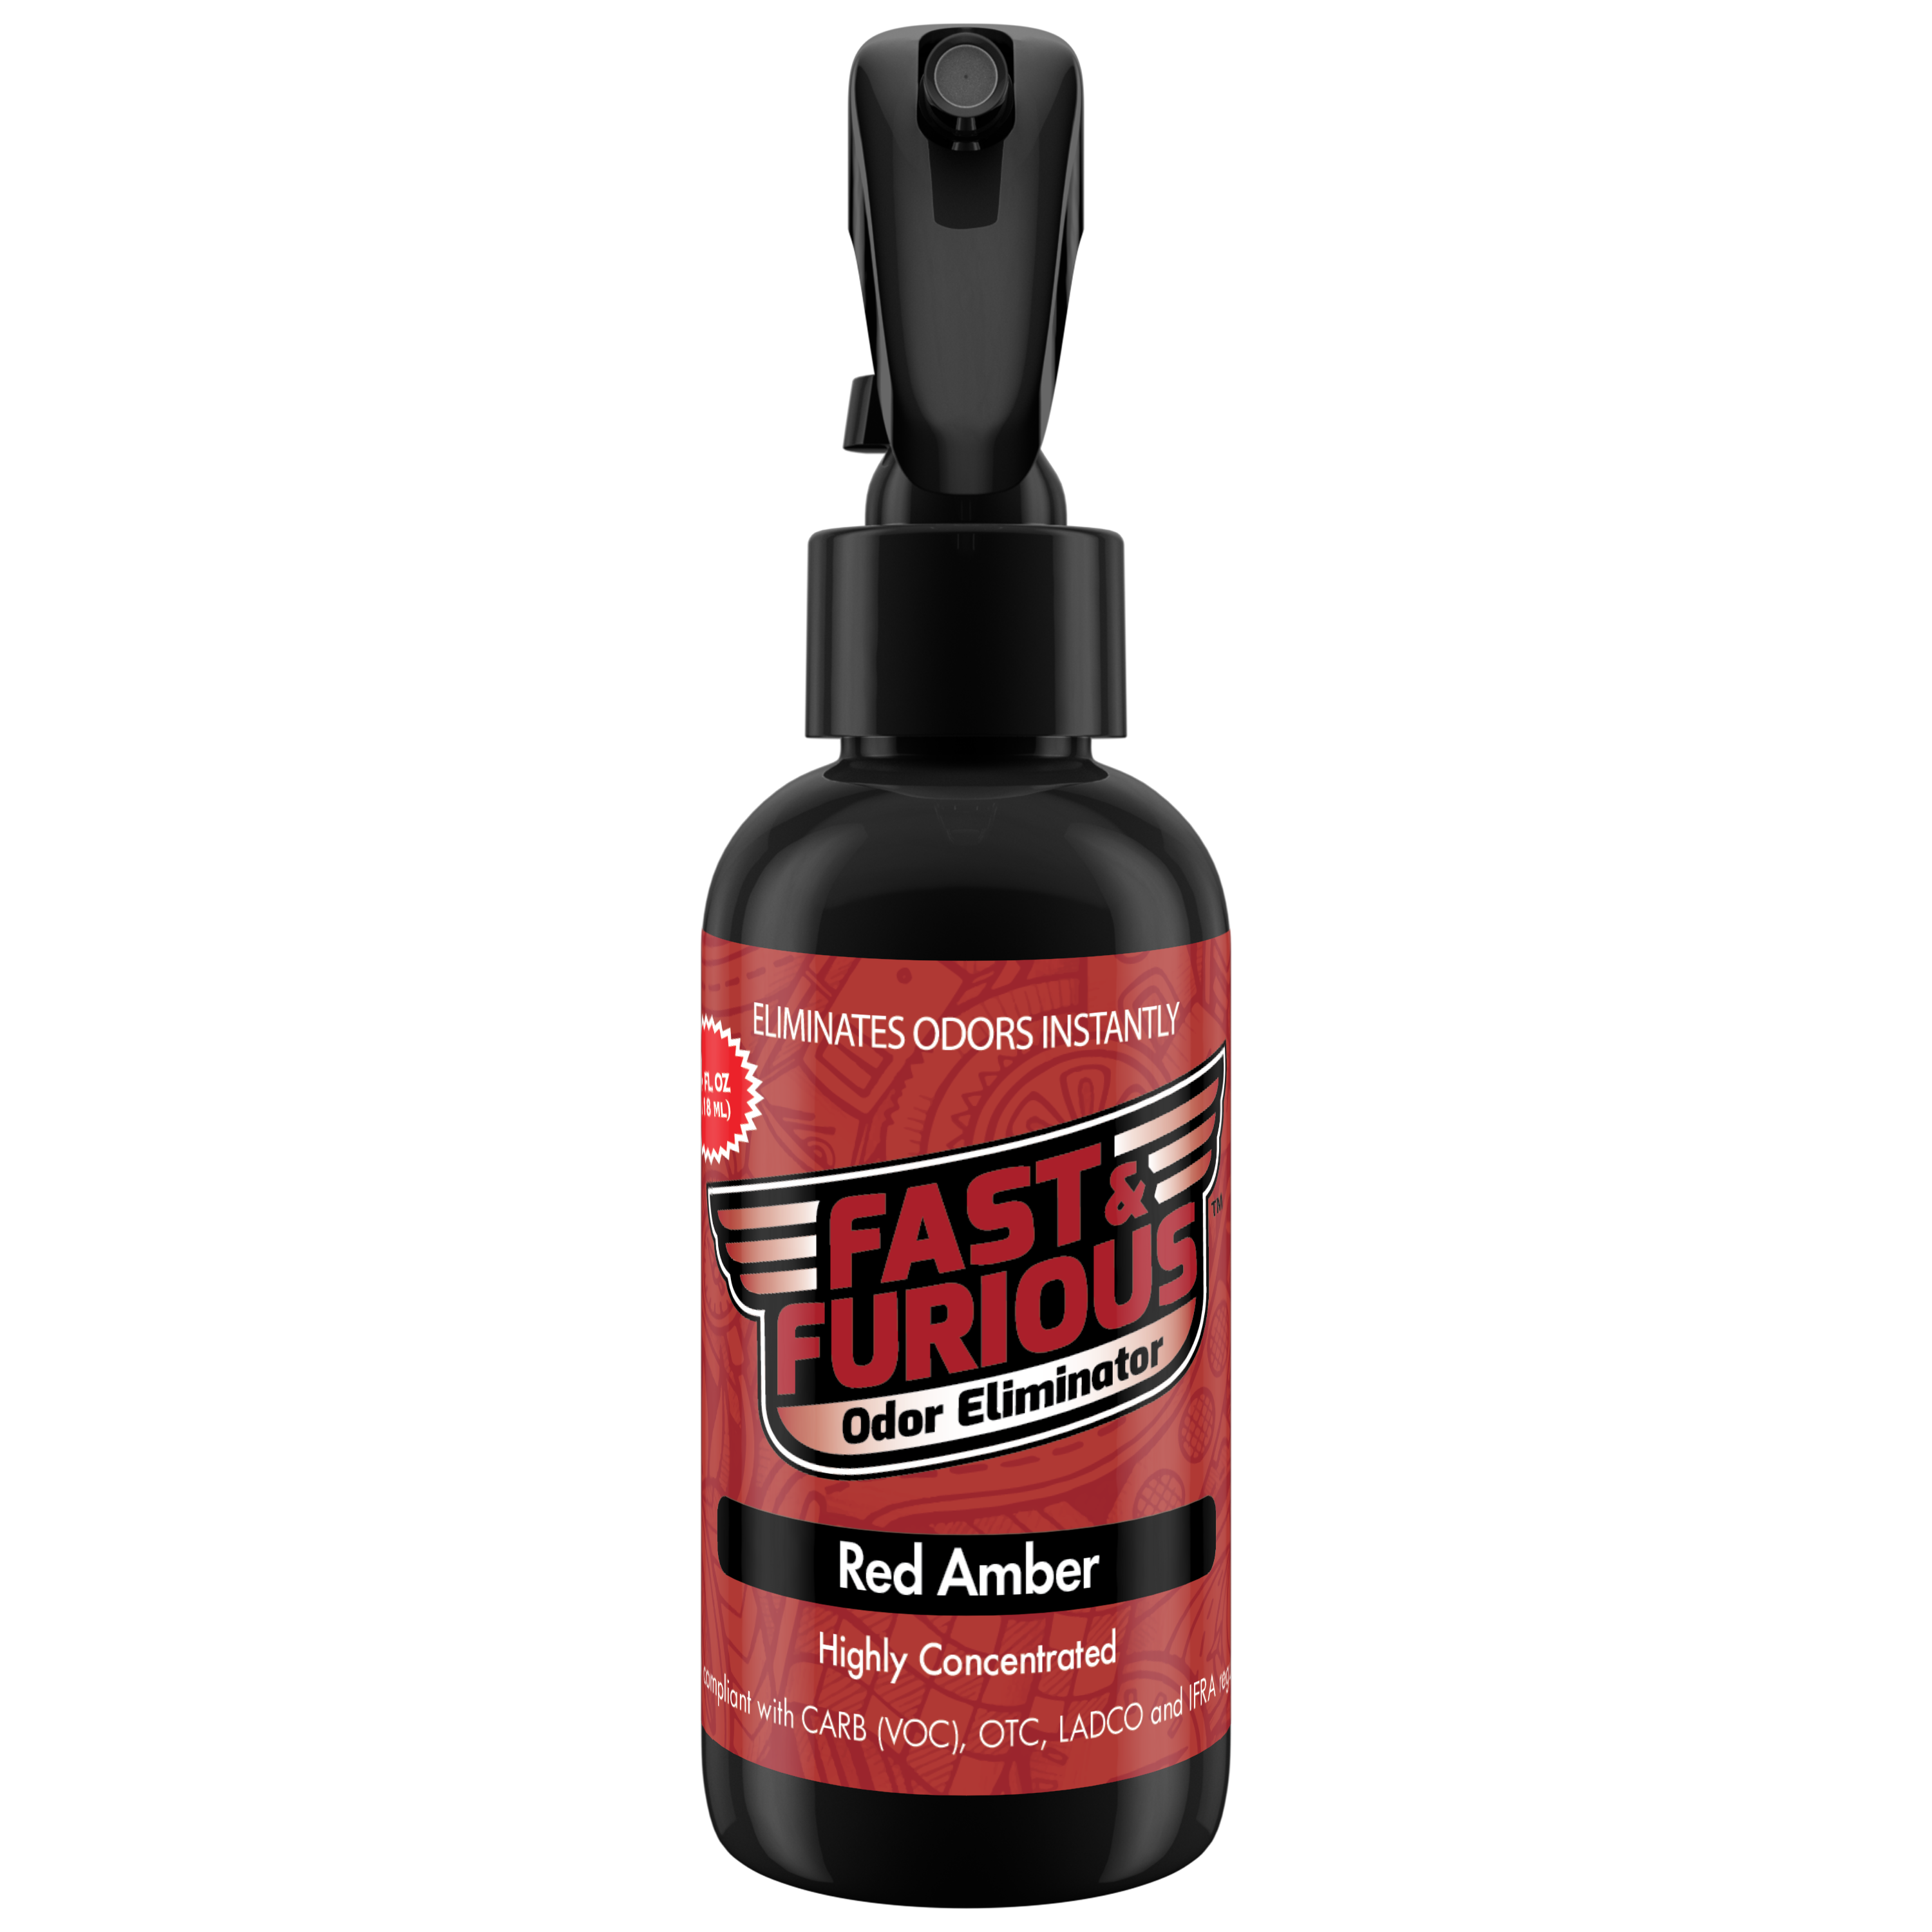 Fast and Furious Odor Eliminator - Red Amber Scent